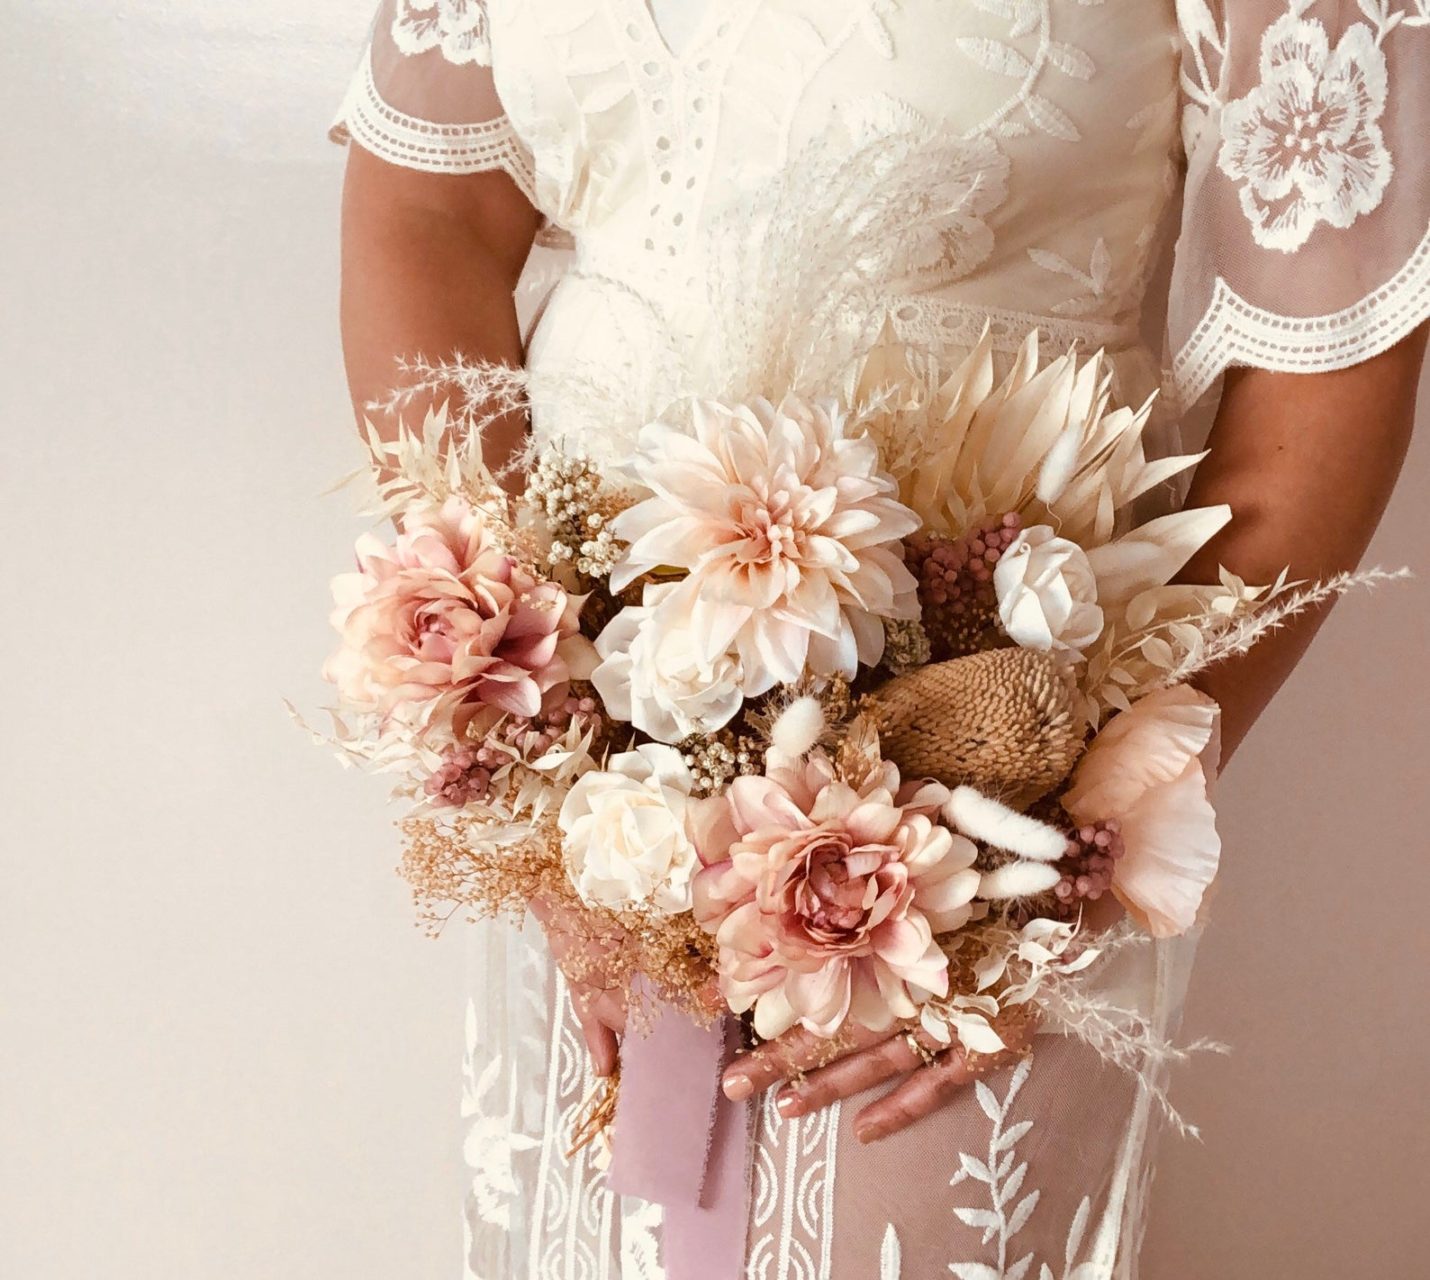 Woman in white dress holding faux and dried floral wedding bouquet